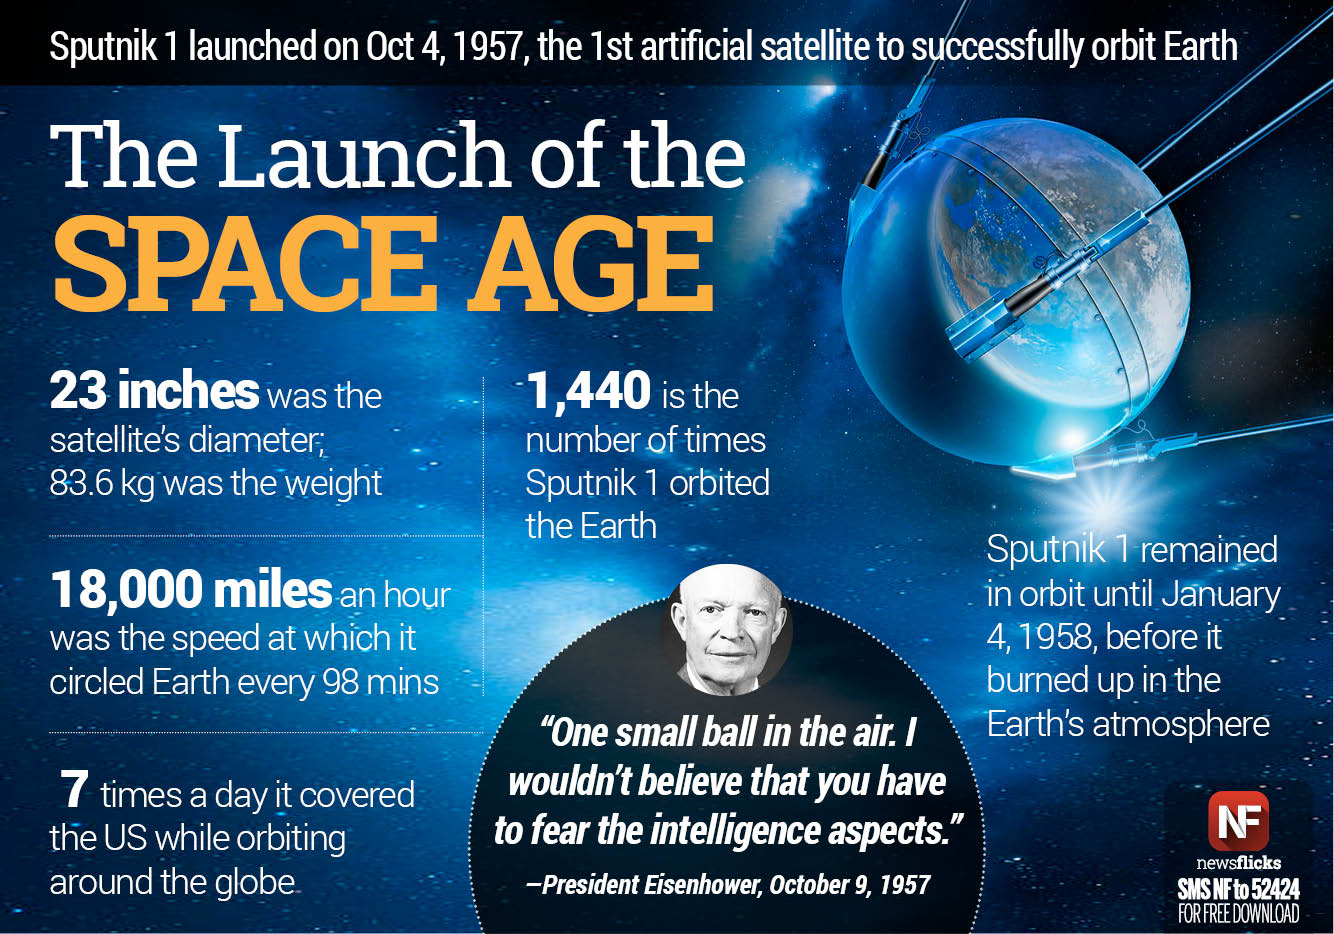 Newsflicks on Twitter: "The first artificial satellite to orbit the earth, Sputnik 1 was launched on Oct 4, 1957, triggering the "space race" https://t.co/V3NlRY3JJH" / Twitter